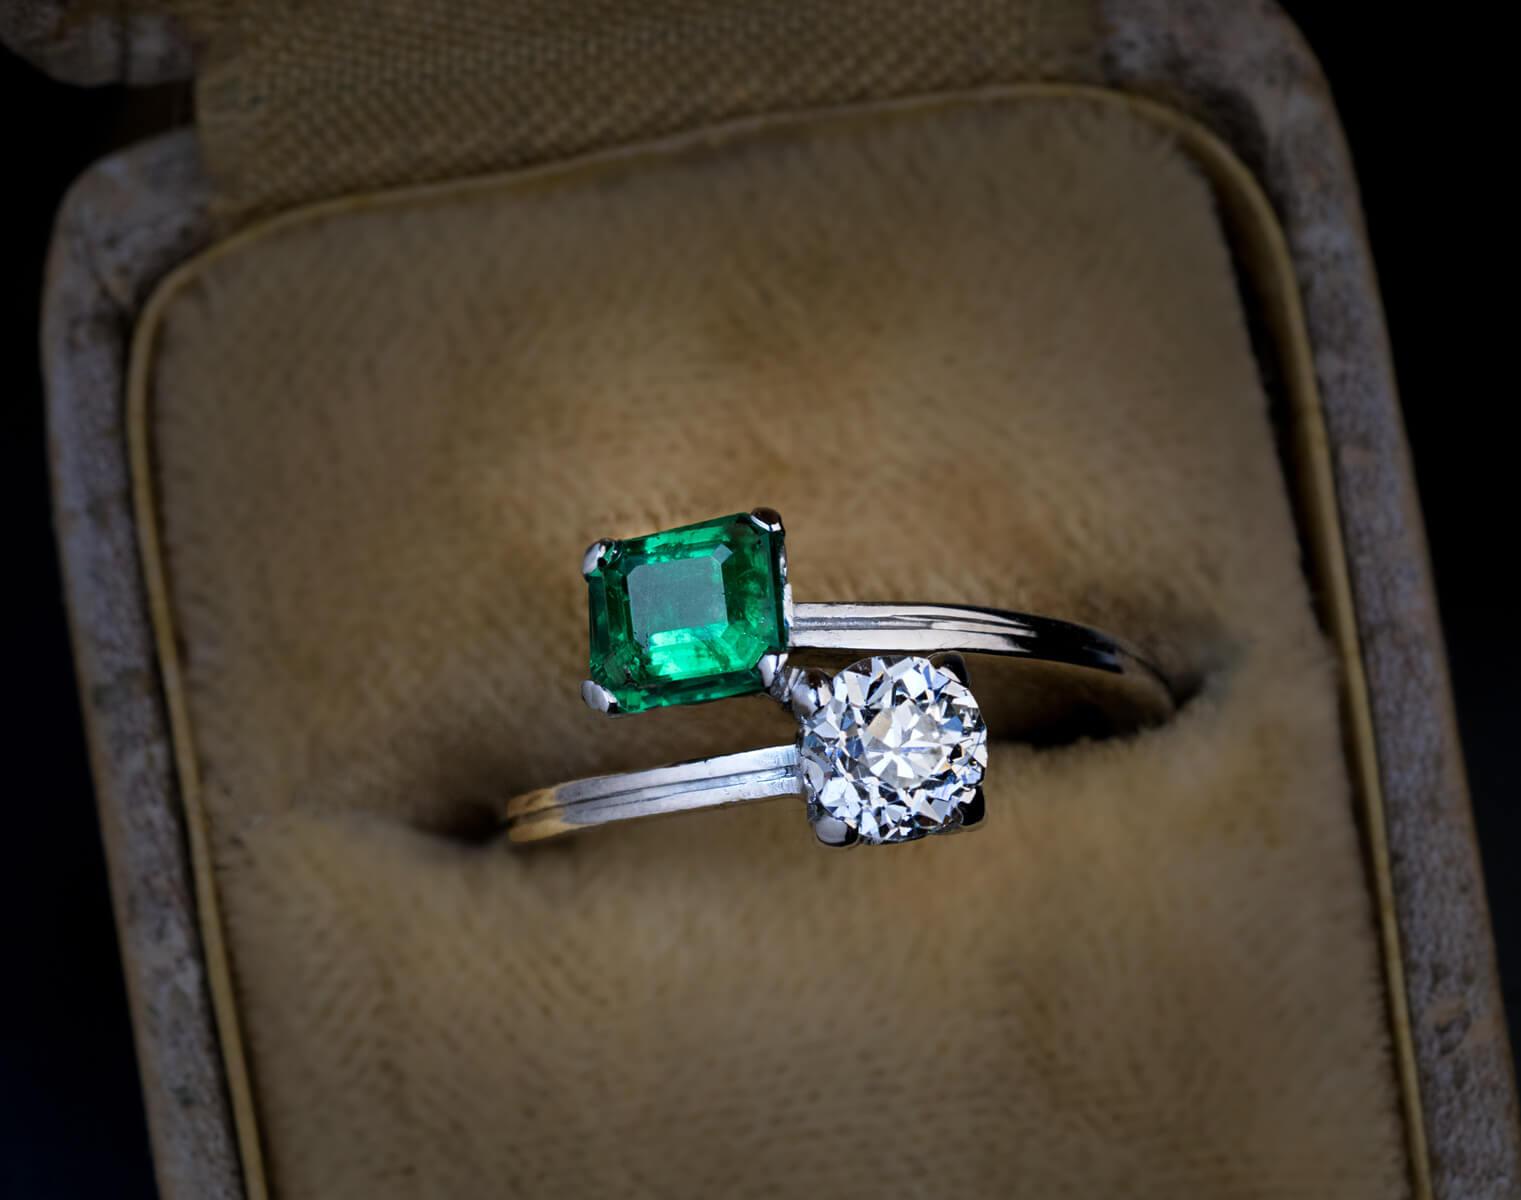 The 14K white gold ring is set with a bright white old European cut diamond (H color, VS1 clarity) and a vivid bluish green Colombian emerald.

Estimated weight of the emerald is 0.62 ct (5.8 x 5.3 x 2.9 mm).

The diamond measures 5.3 x 4.5 mm and